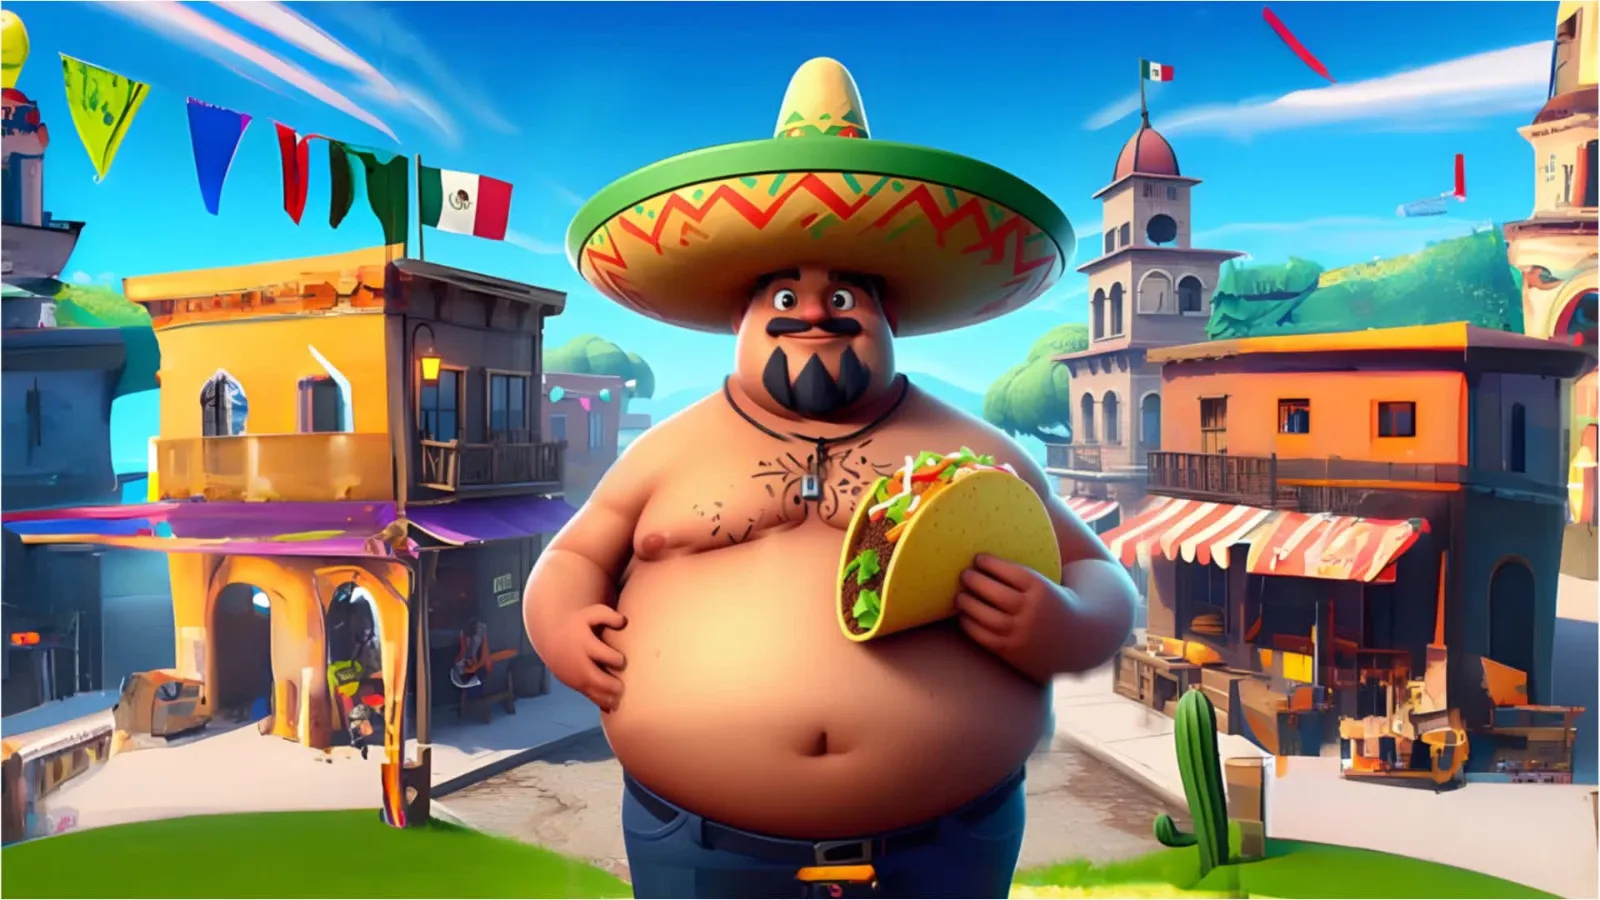 A racist photo of a Mexican man holding a taco and wearing a sombrero uploaded to Fortnite.